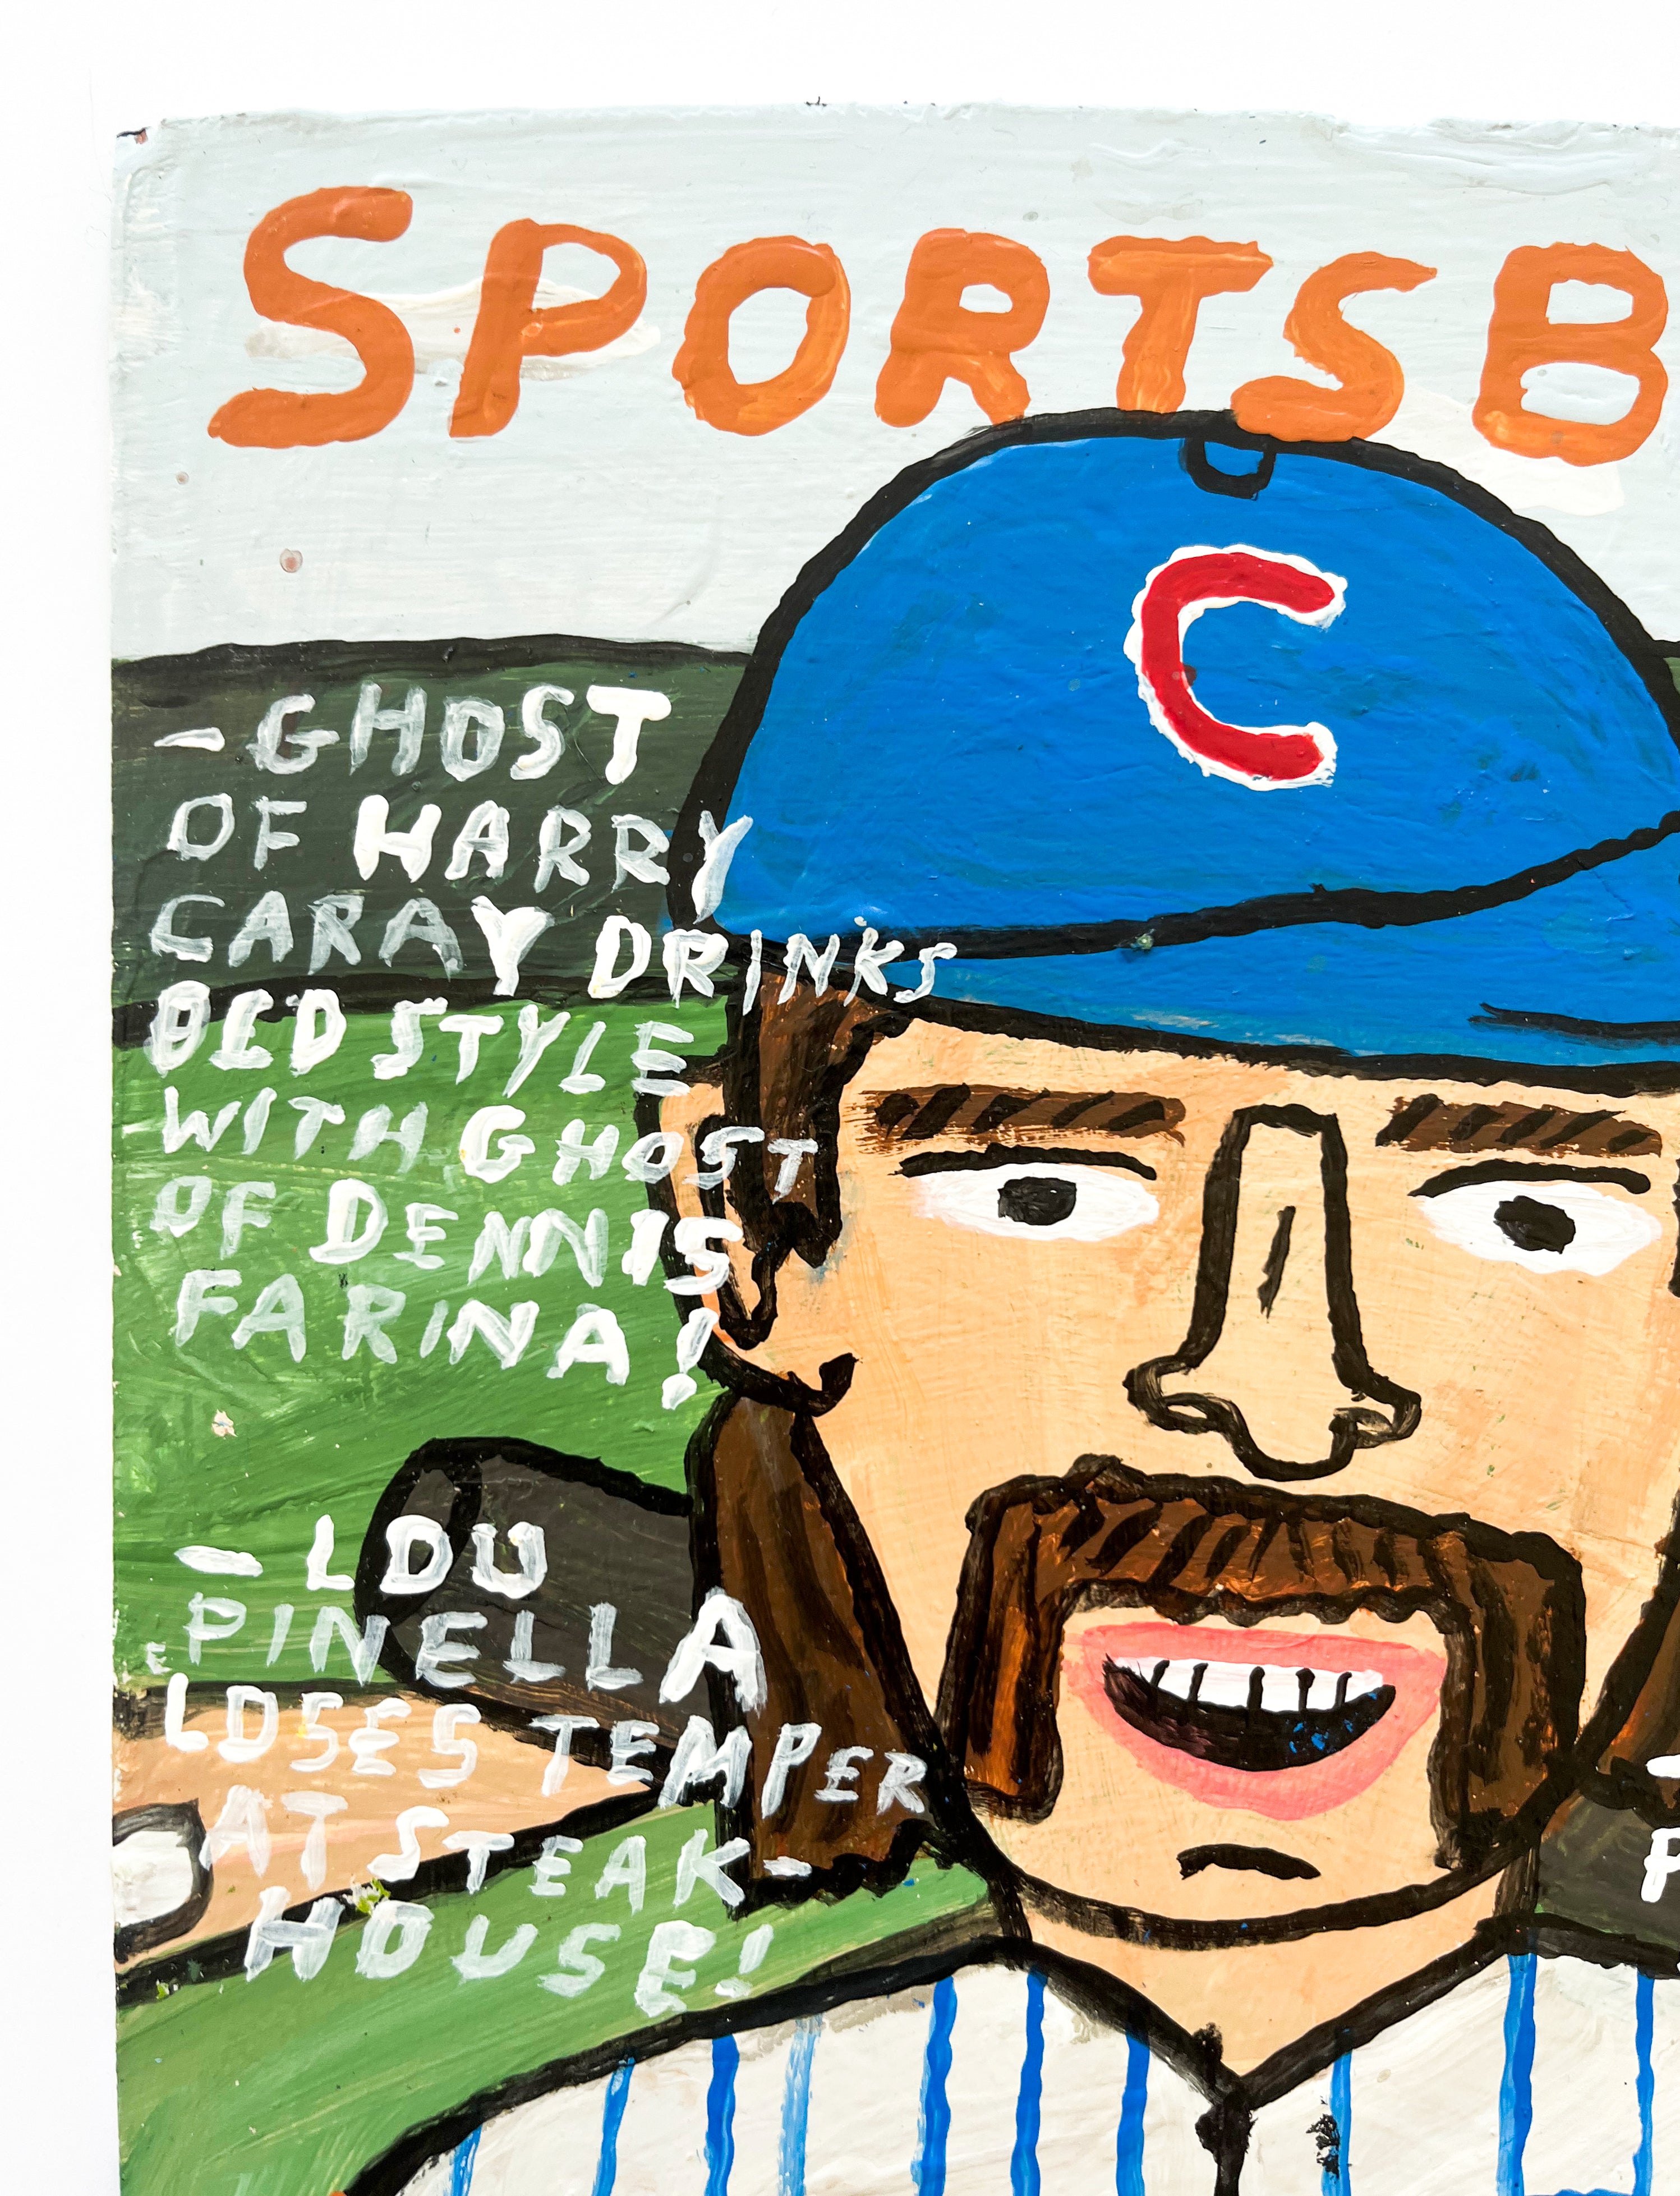 "Sportsball: Cubs" by Dont Fret